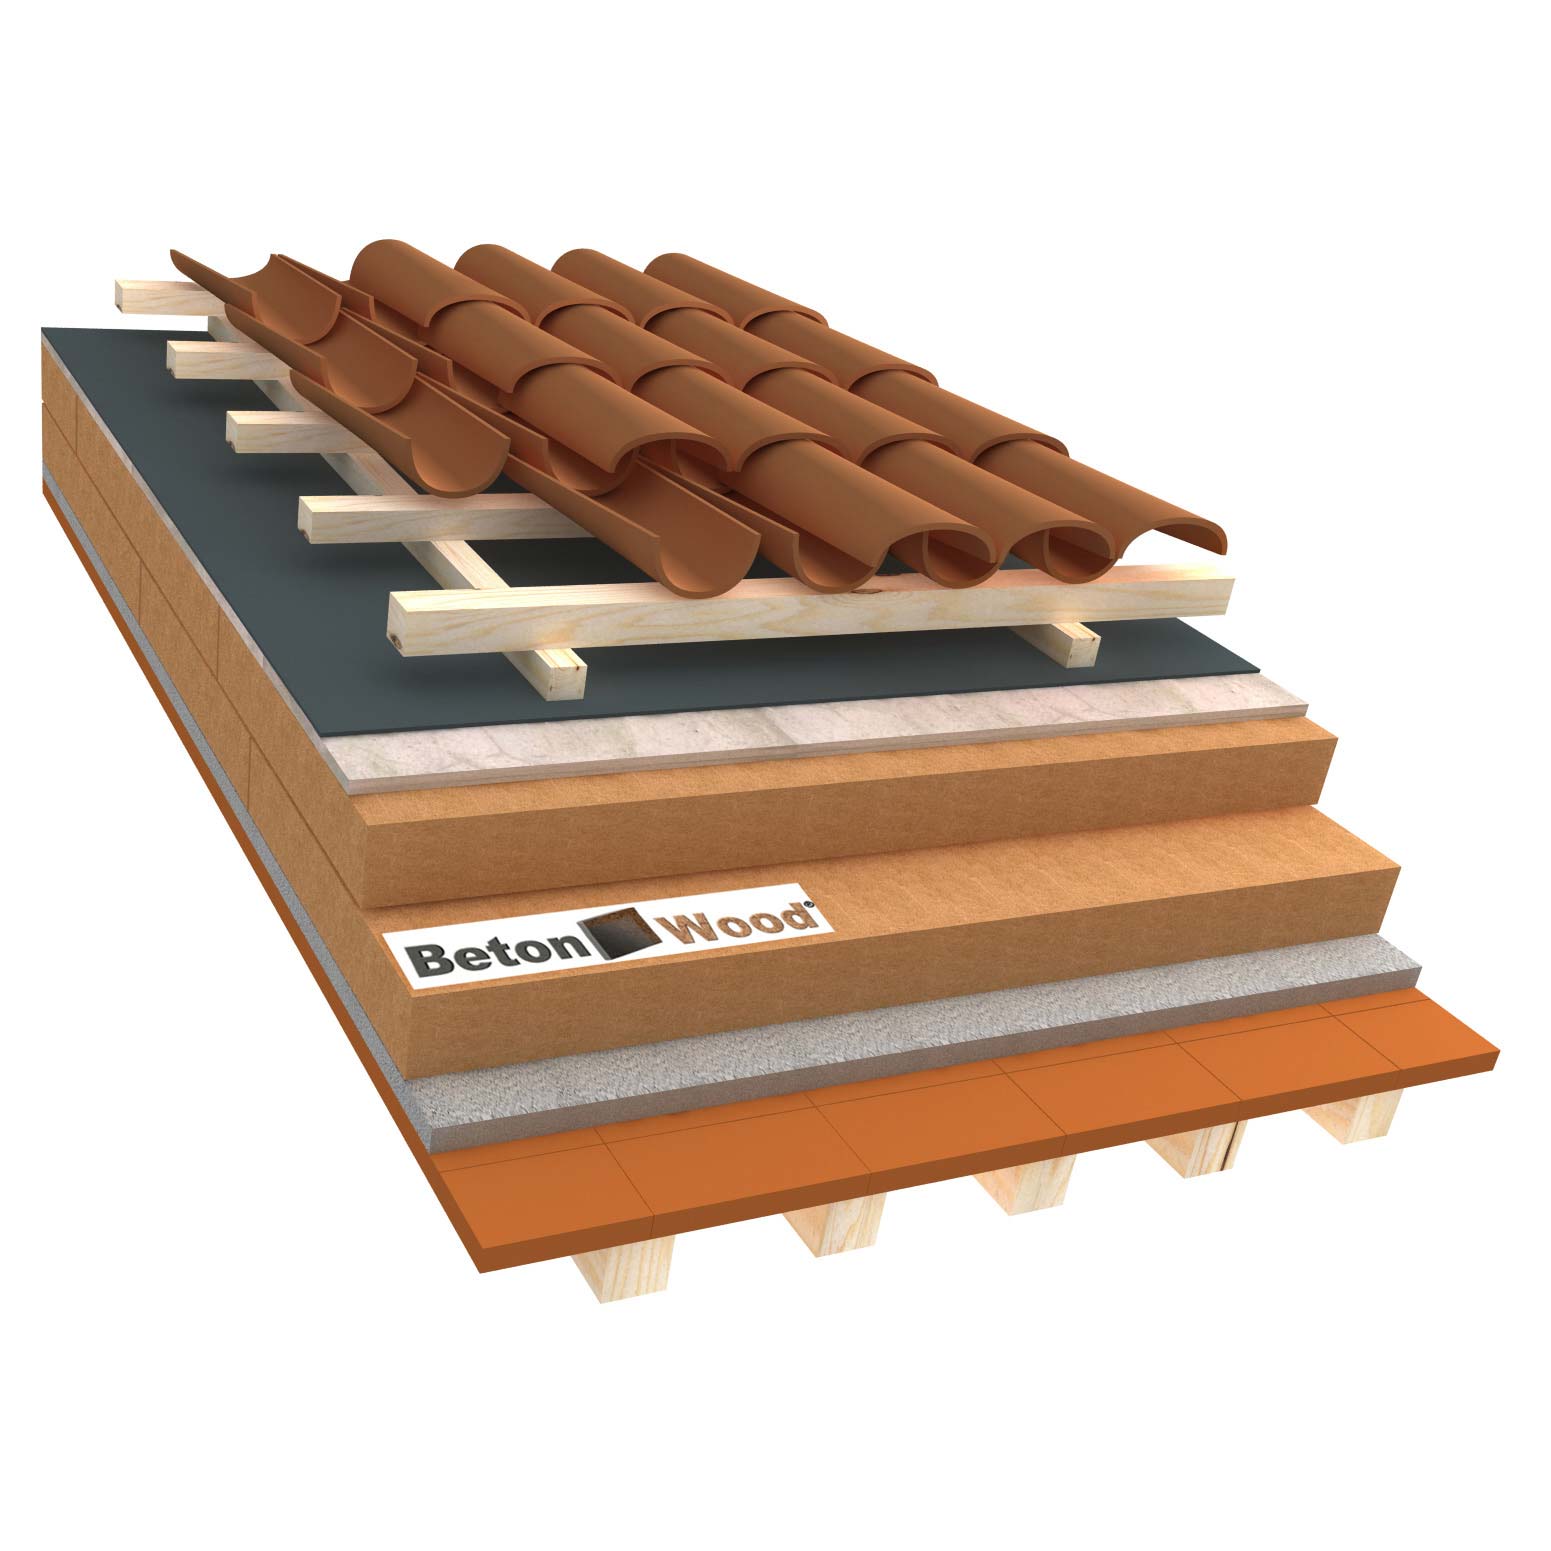 Ventilated roof with fiber wood Universal and cement bonded particle boards on terracotta tiles